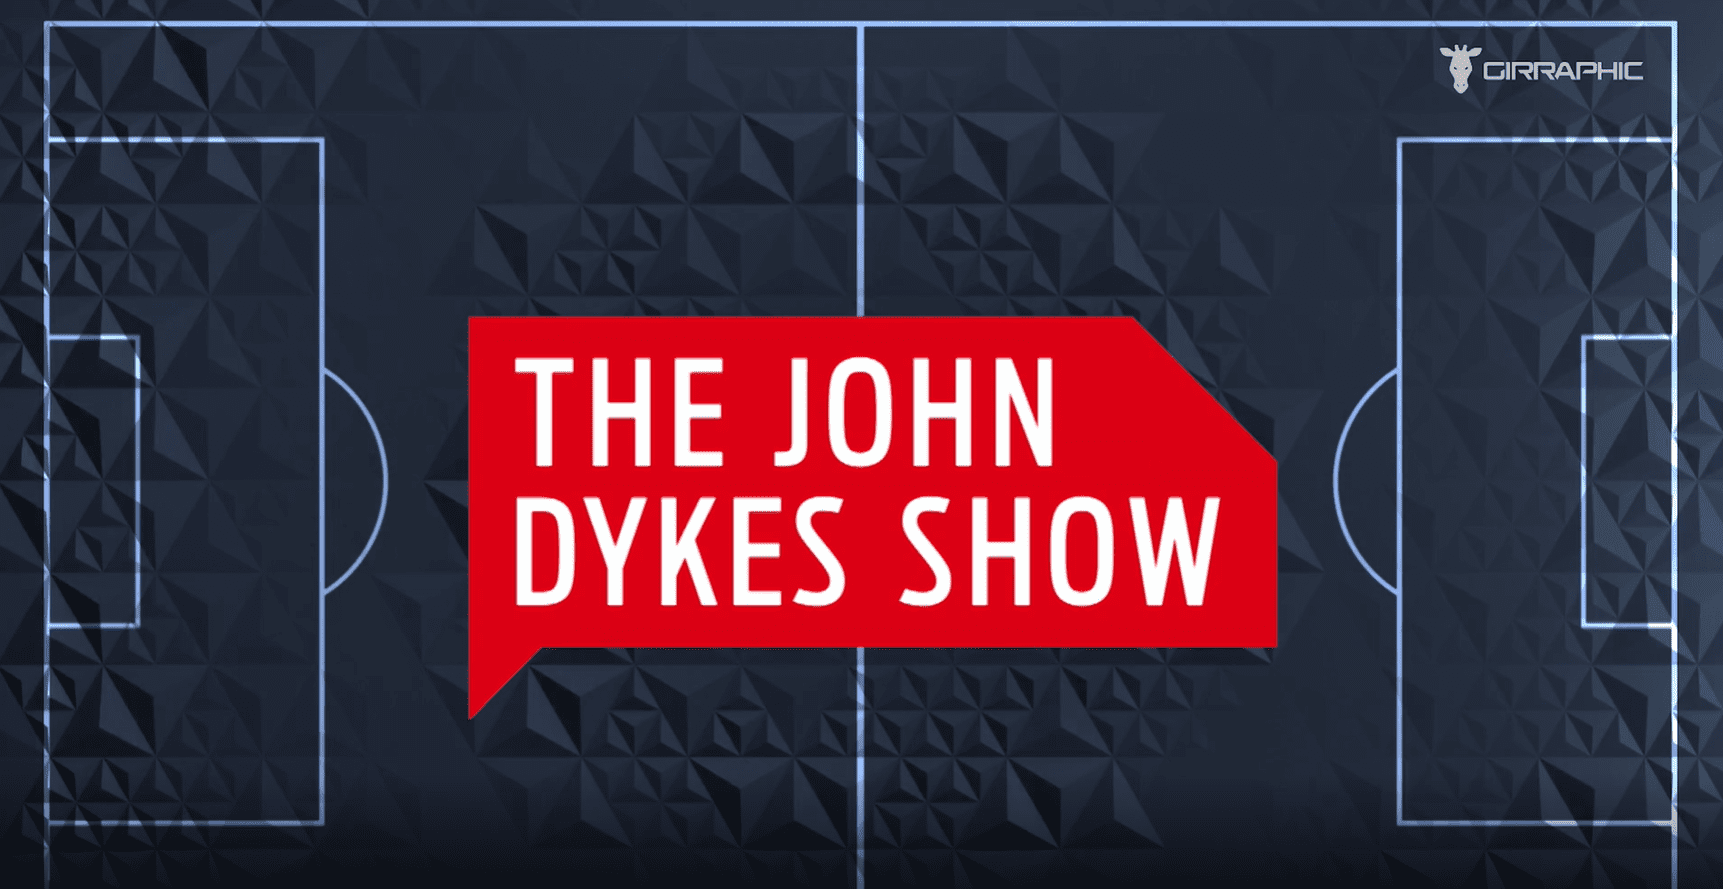 THE JOHN DYKES SHOW GRAPHIC PACKAGE